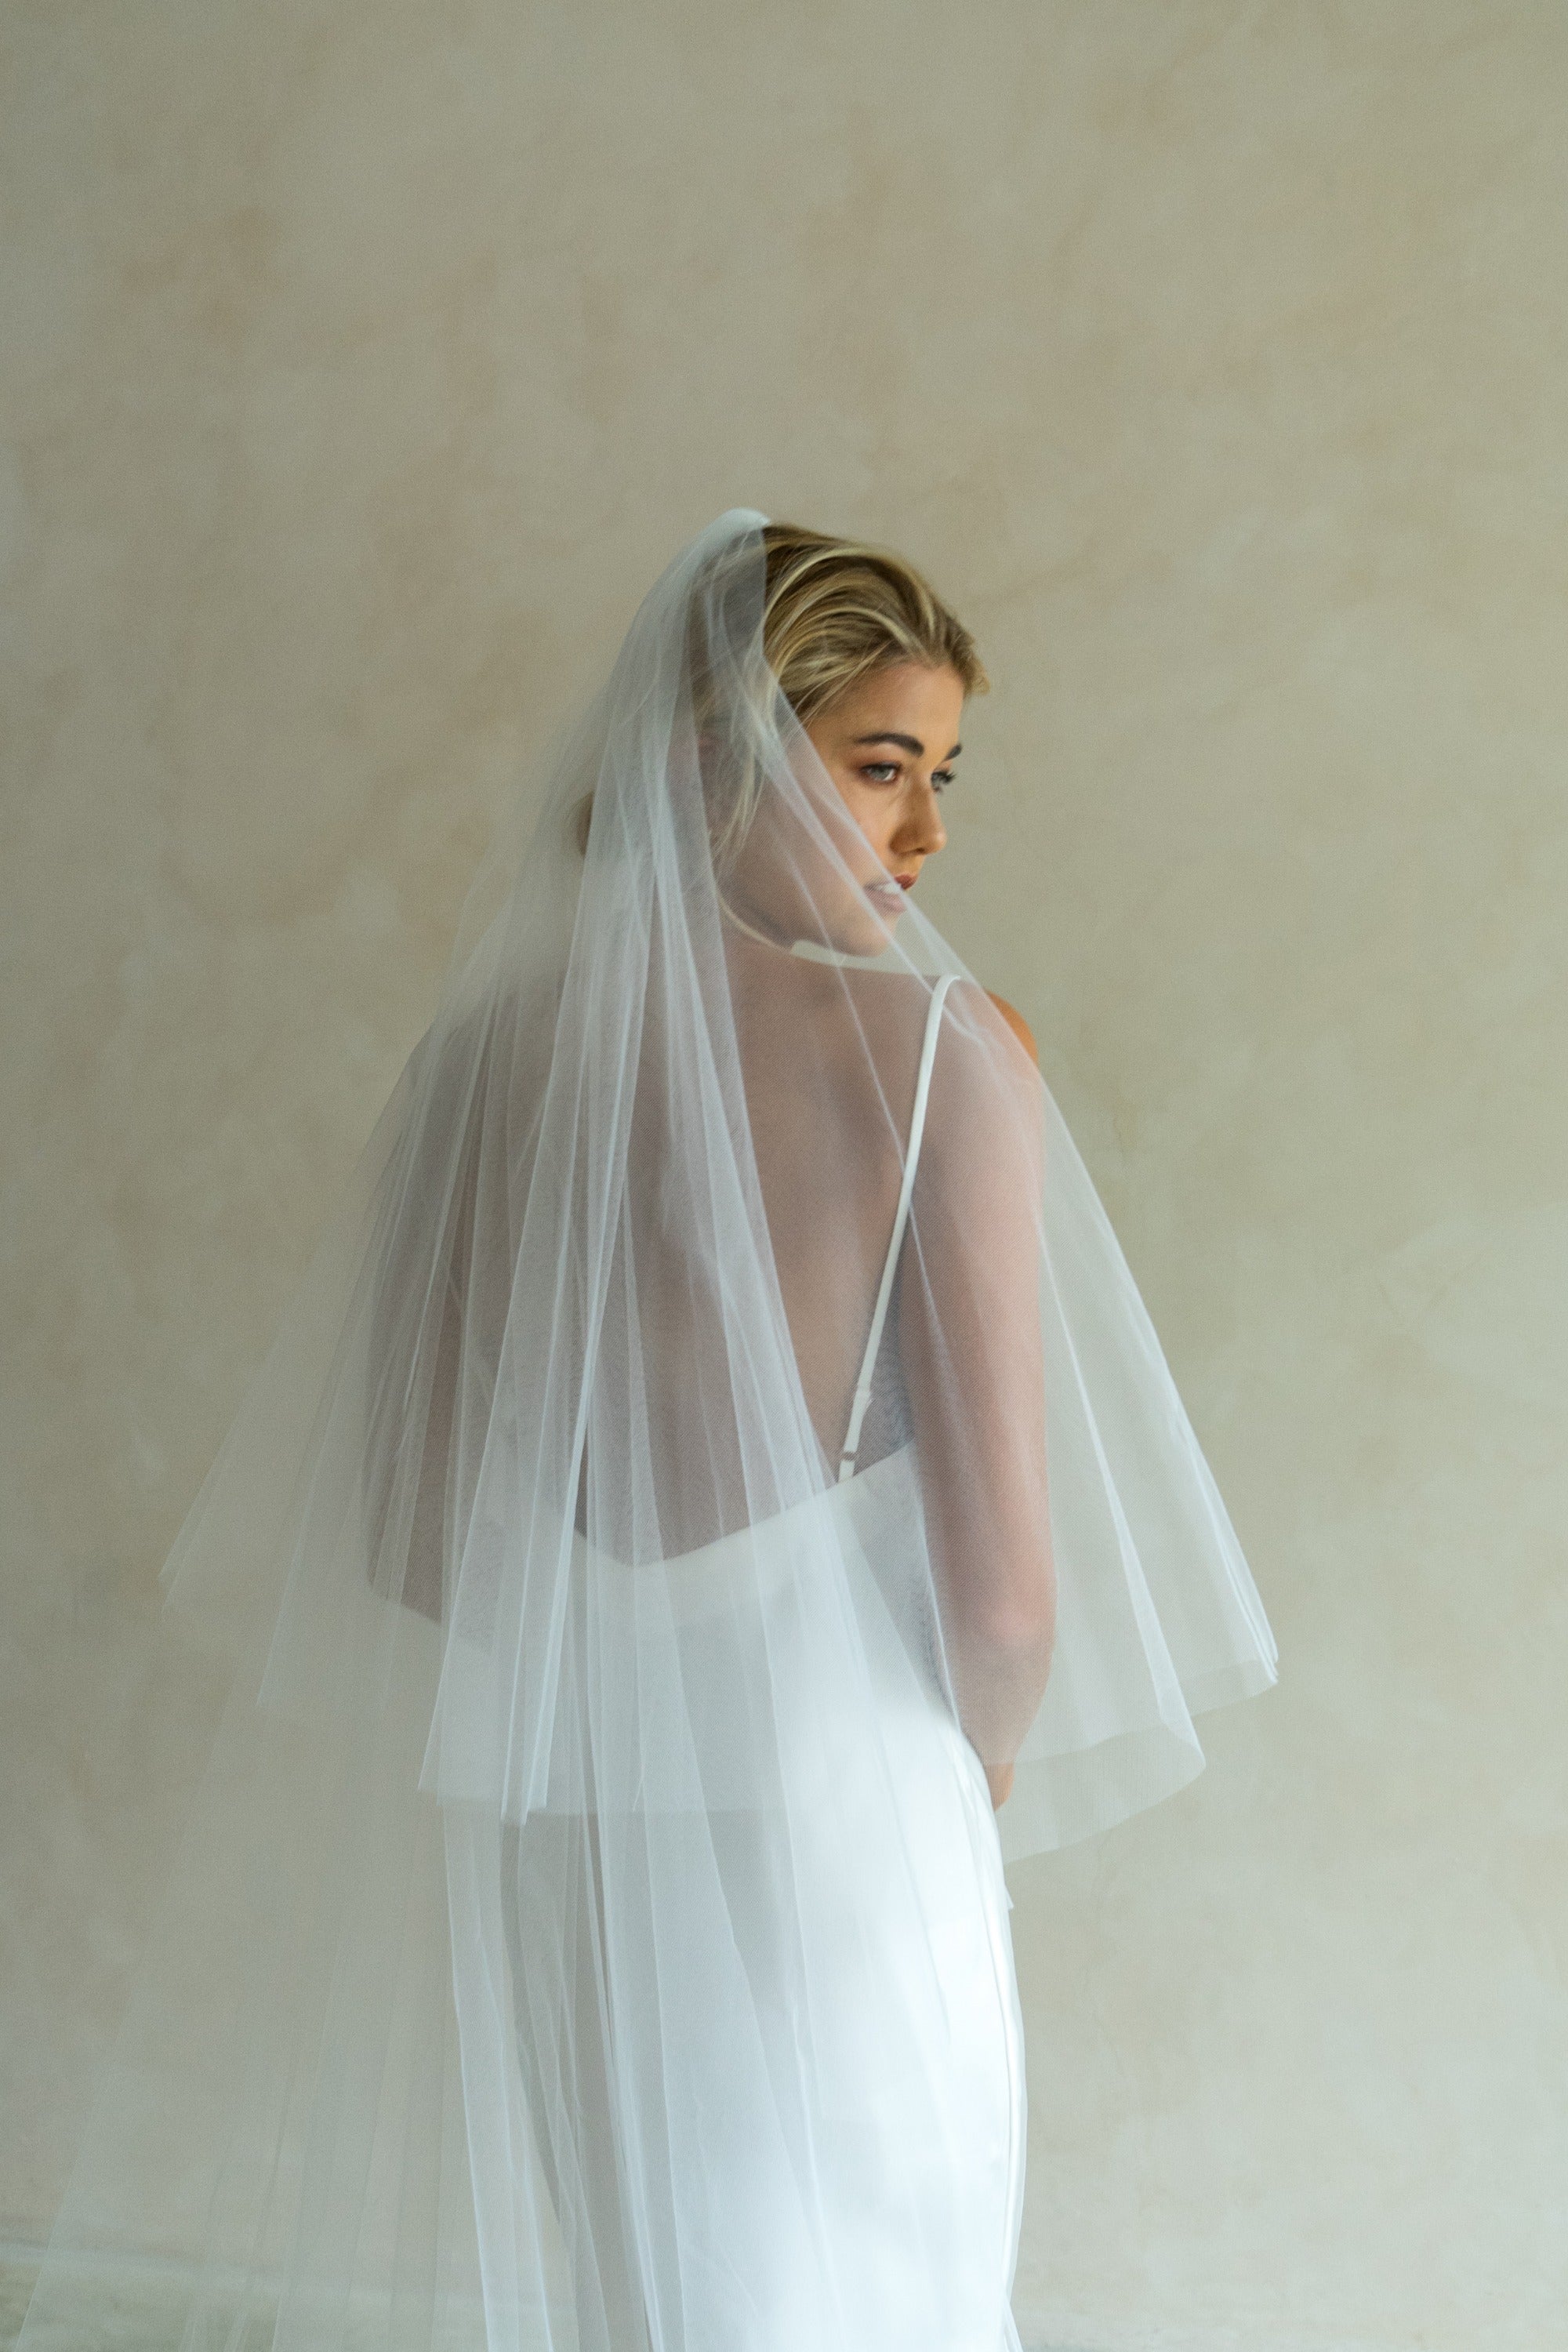 Two Tier Embroidered Wedding Veil - That's Amore